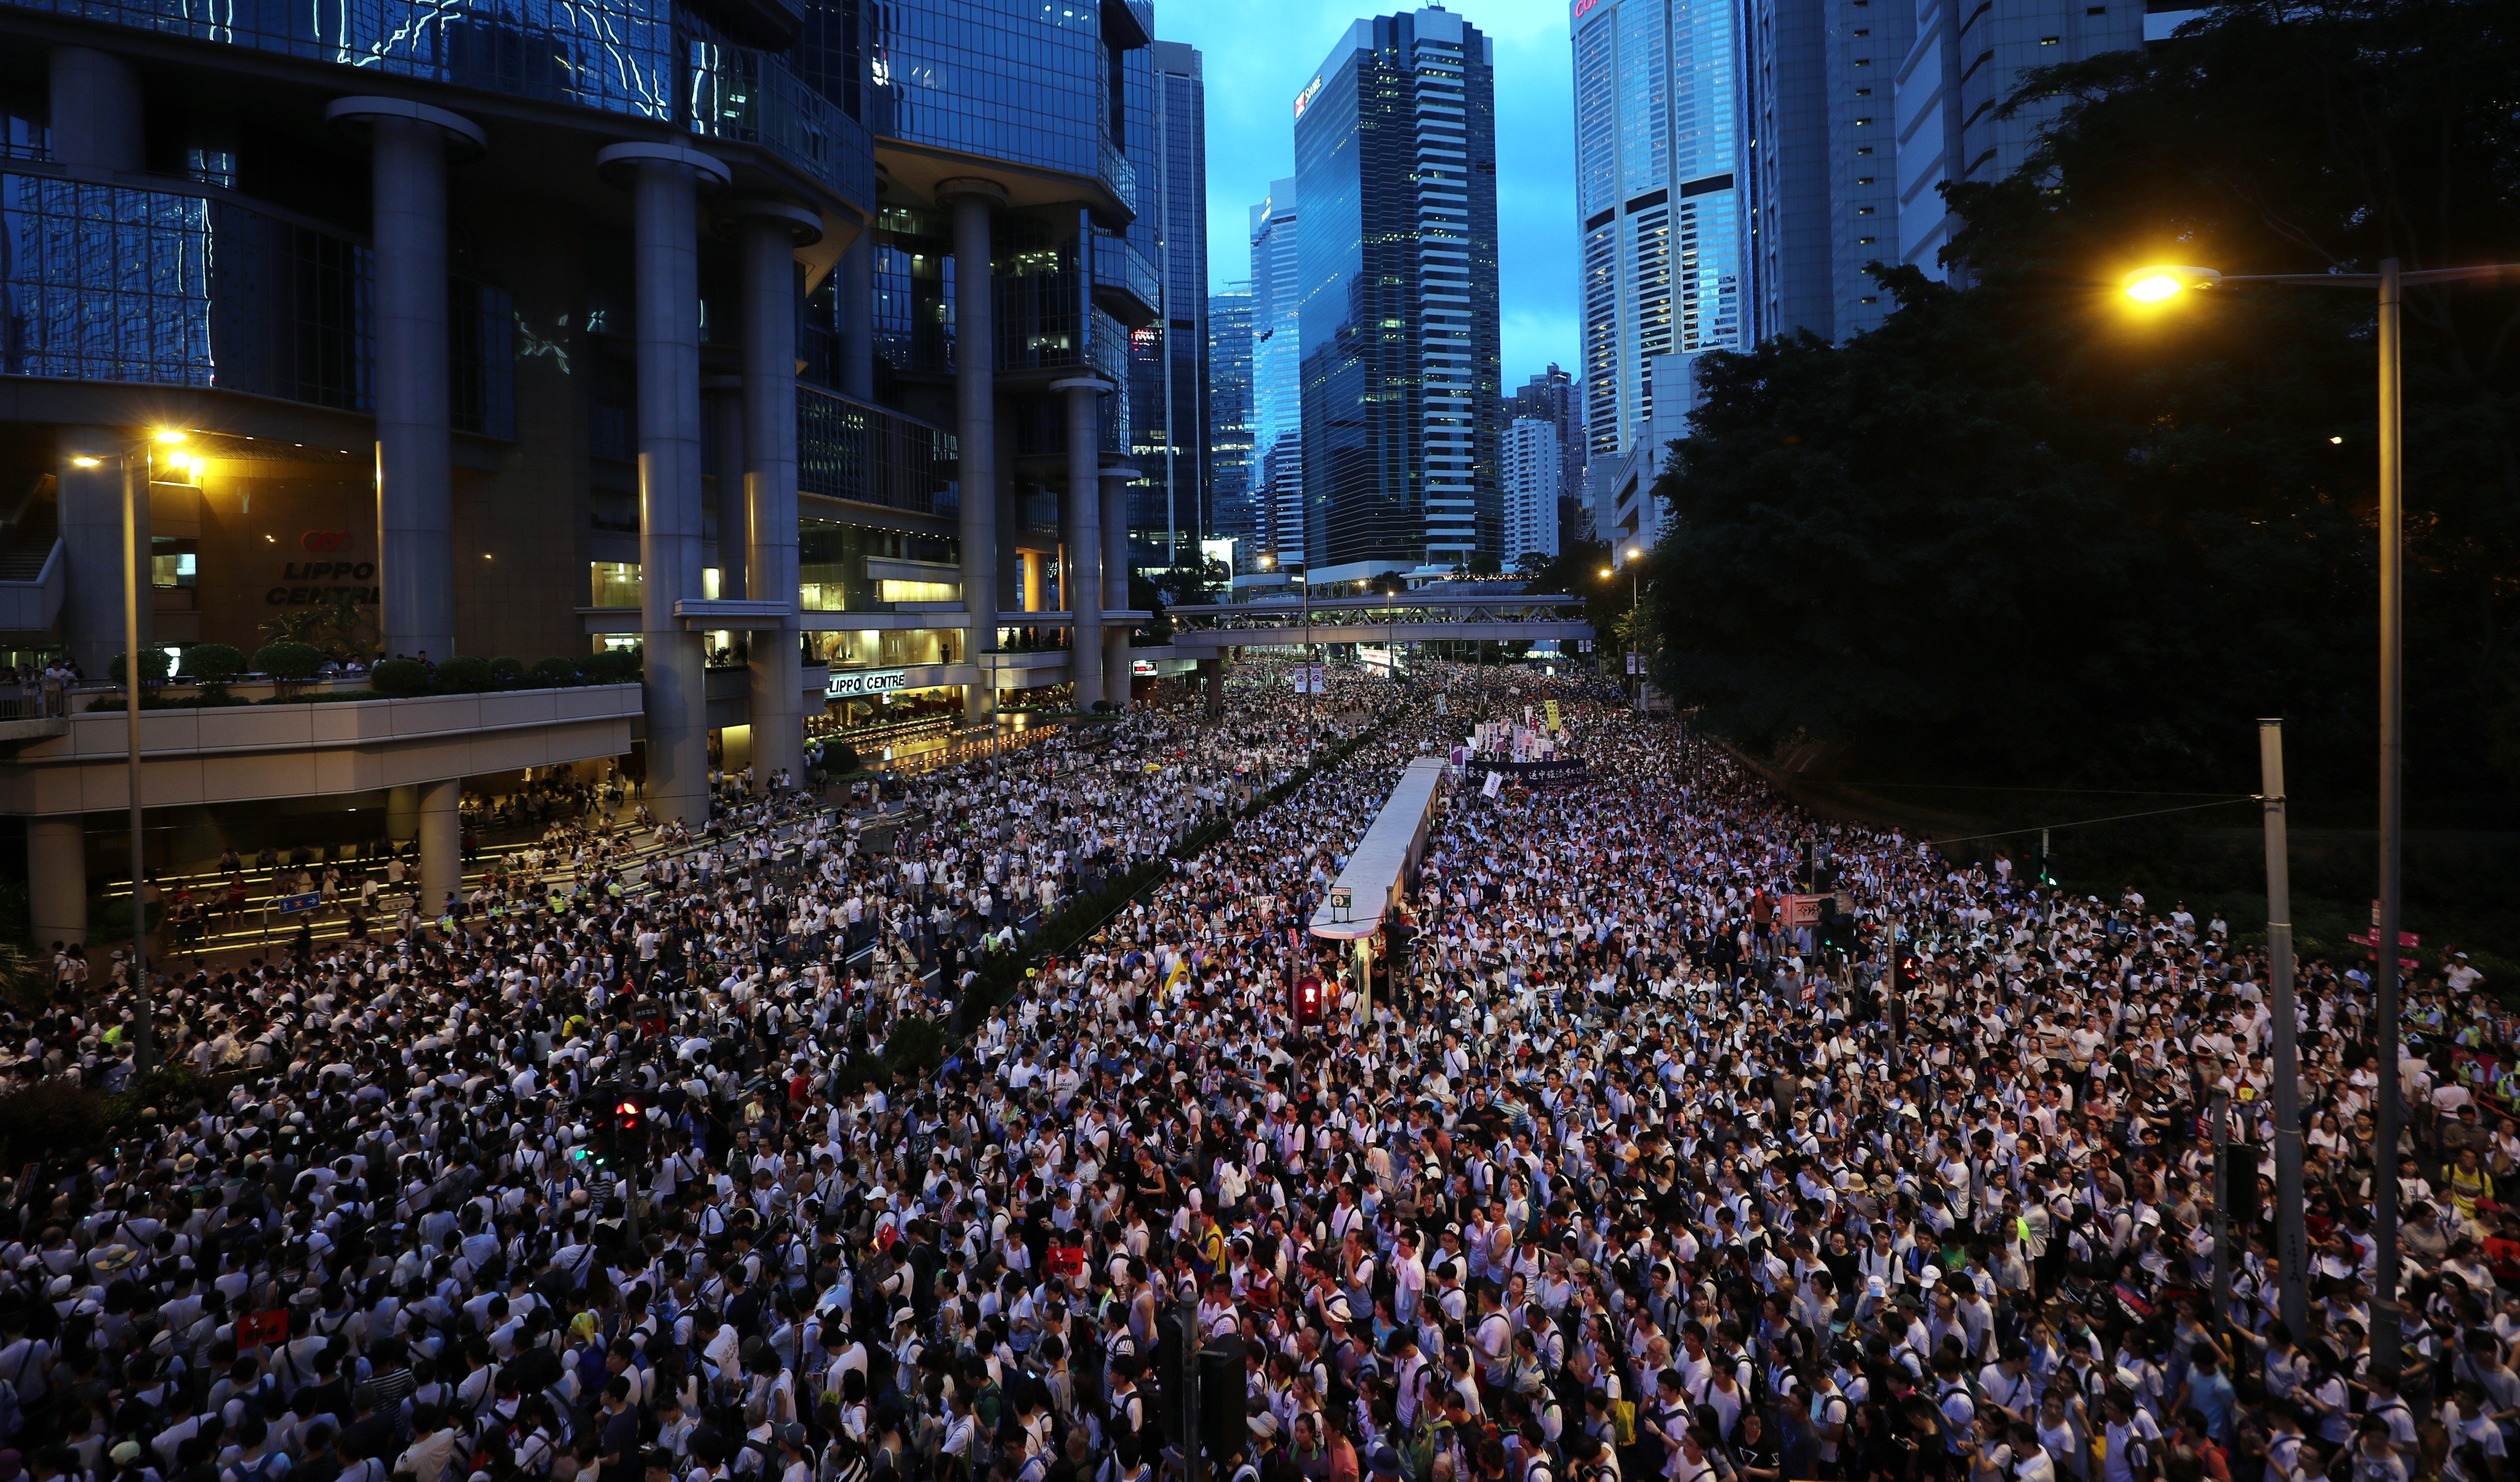 Protesters marched from Causeway Bay to the Government Headquarters in Admiralty to protest a proposed extradition bill on June 9. Photo: Sam Tsang